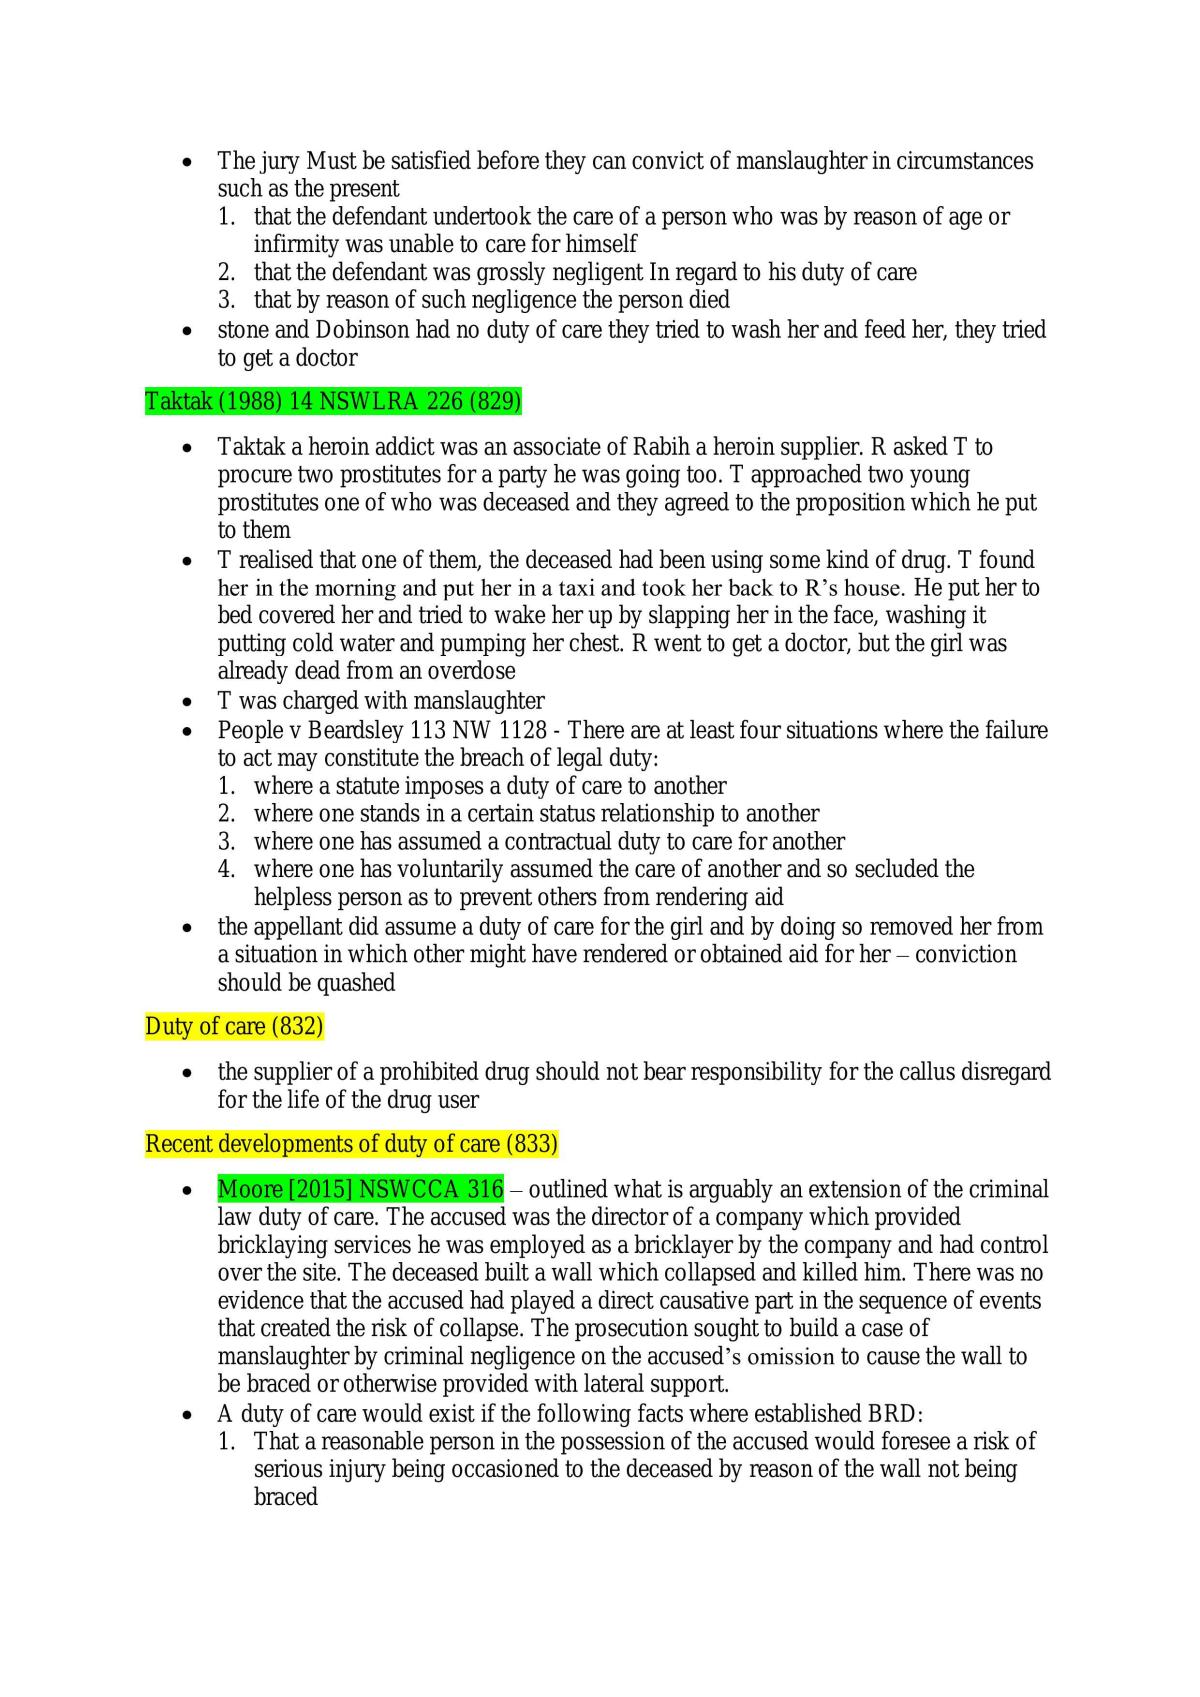 CRIM2021 Full Study Notes - Page 87